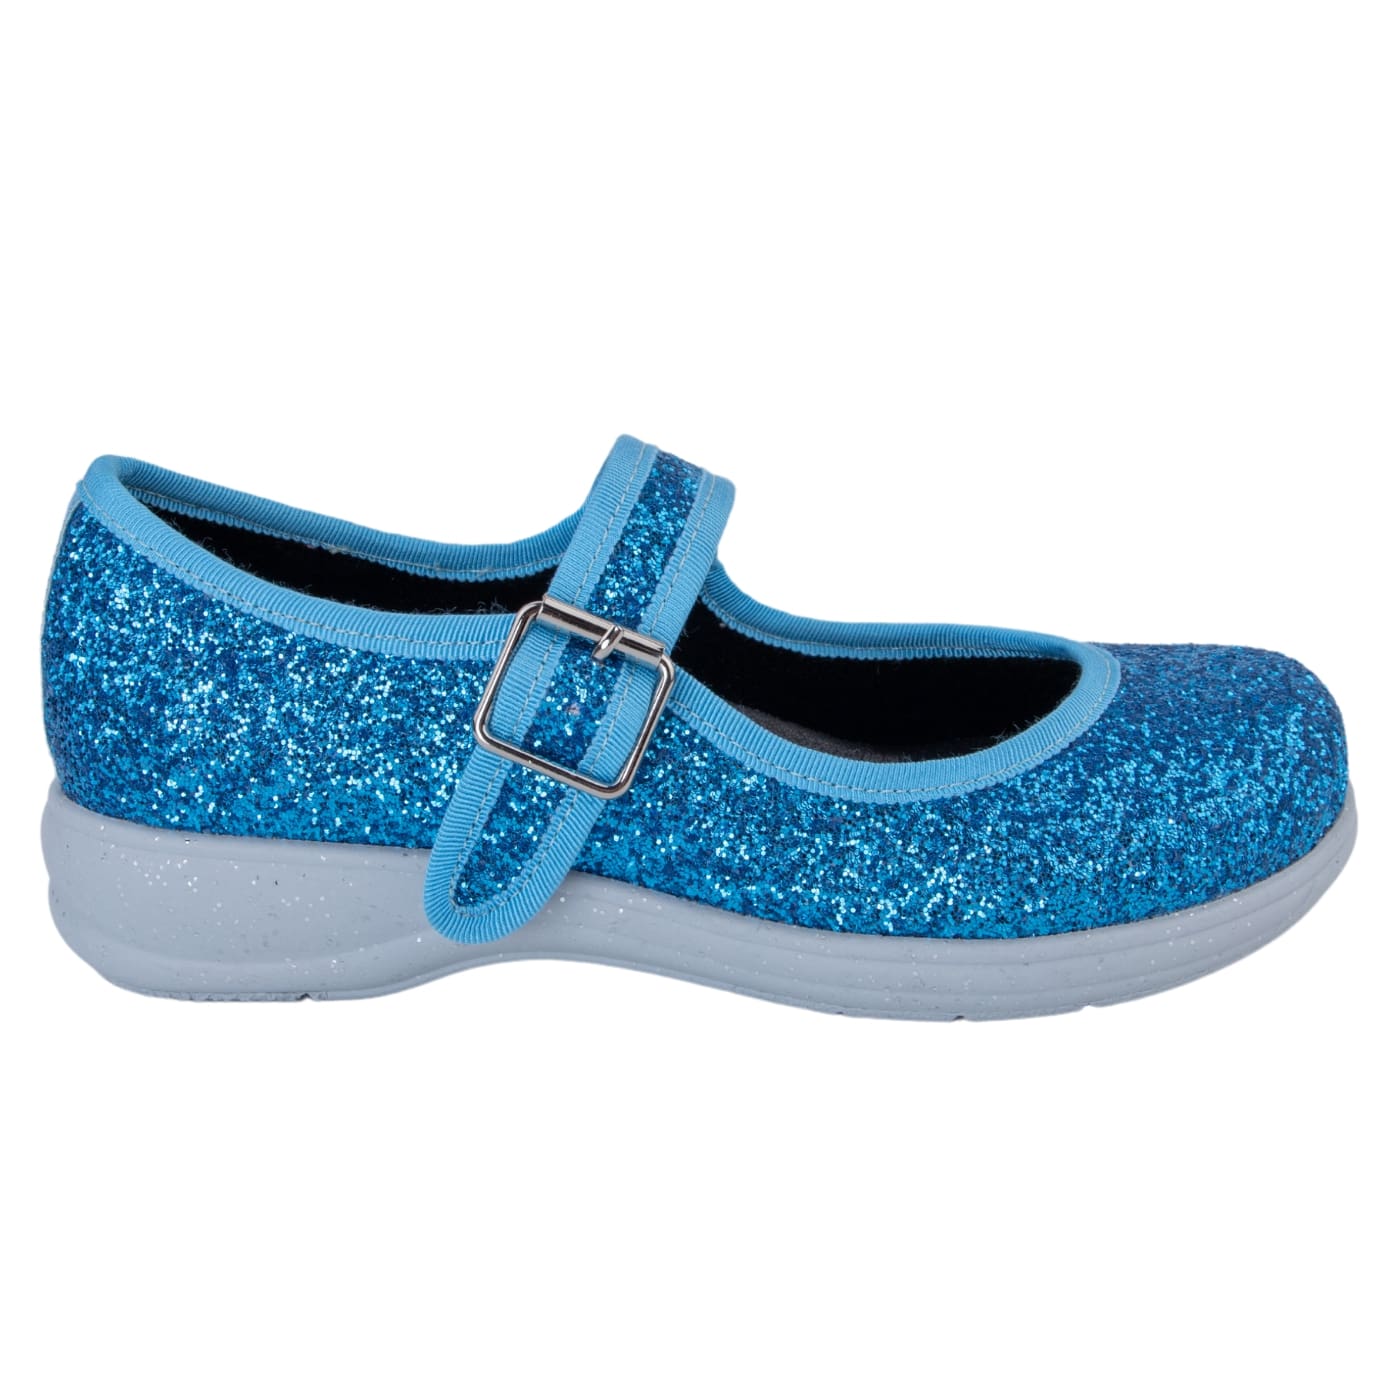 Serenity Mary Janes by RainbowsAndFairies.com.au (Aqua Glitter - Turquoise - Mismatched Shoes - Cute & Comfy - Buckle Up Shoes - Holographic - Glitter) - SKU: FW_MARYJ_GLITR_SER - Pic-03